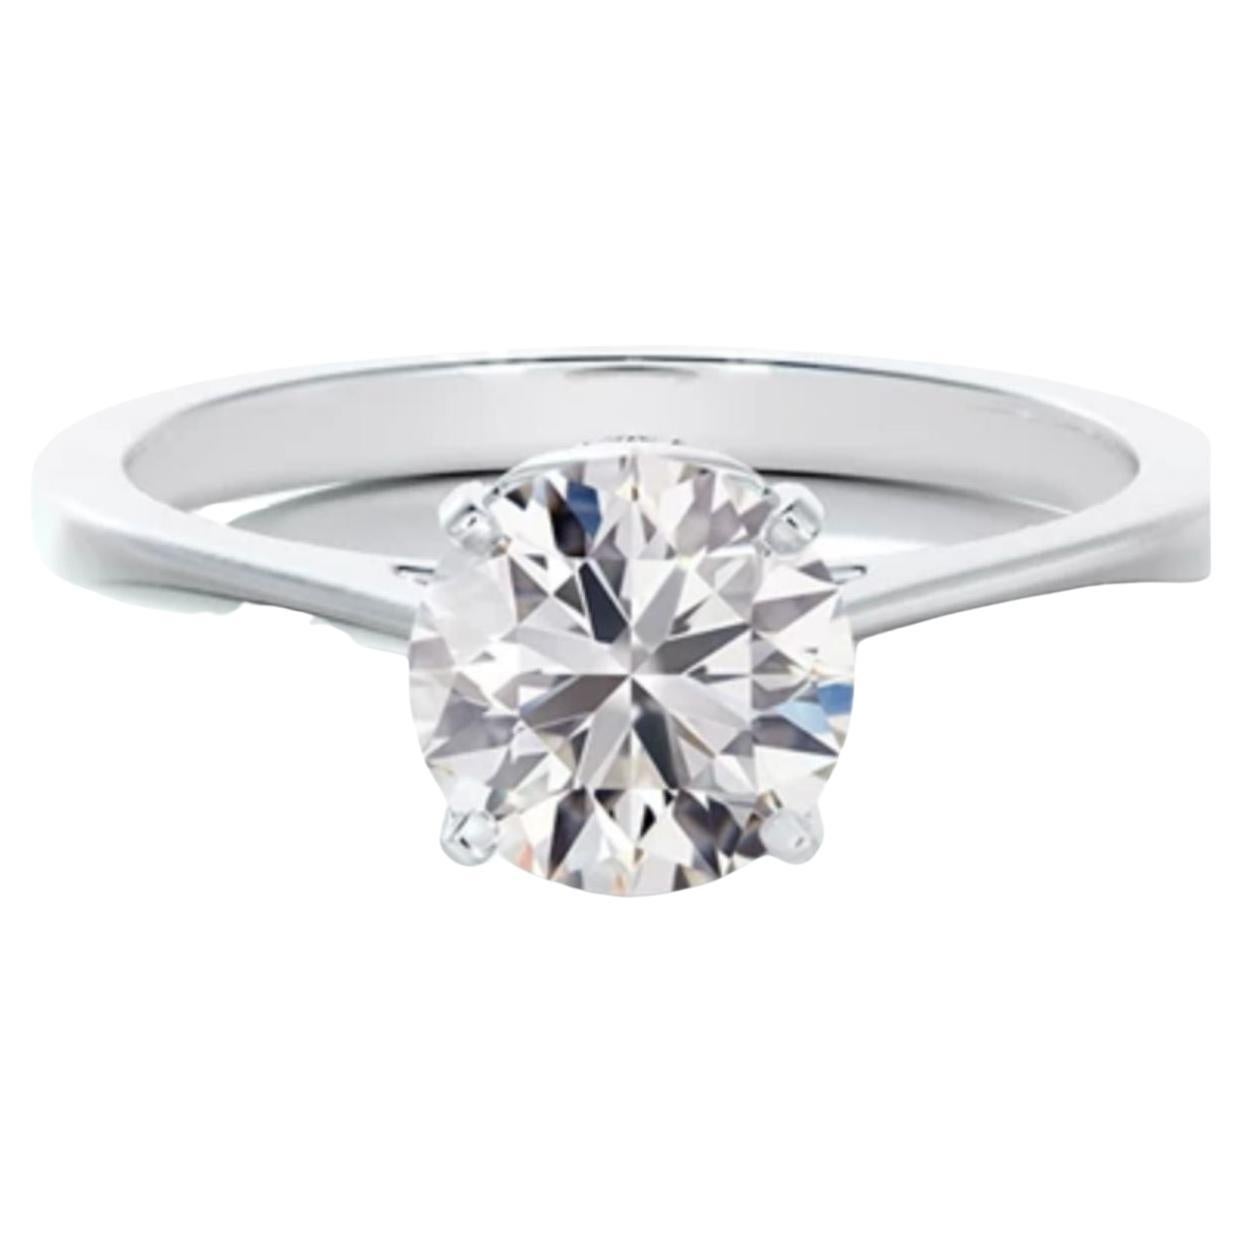 Certified 1.01 Carat Diamond Solitaire Engagement Ring, VS Quality For Sale